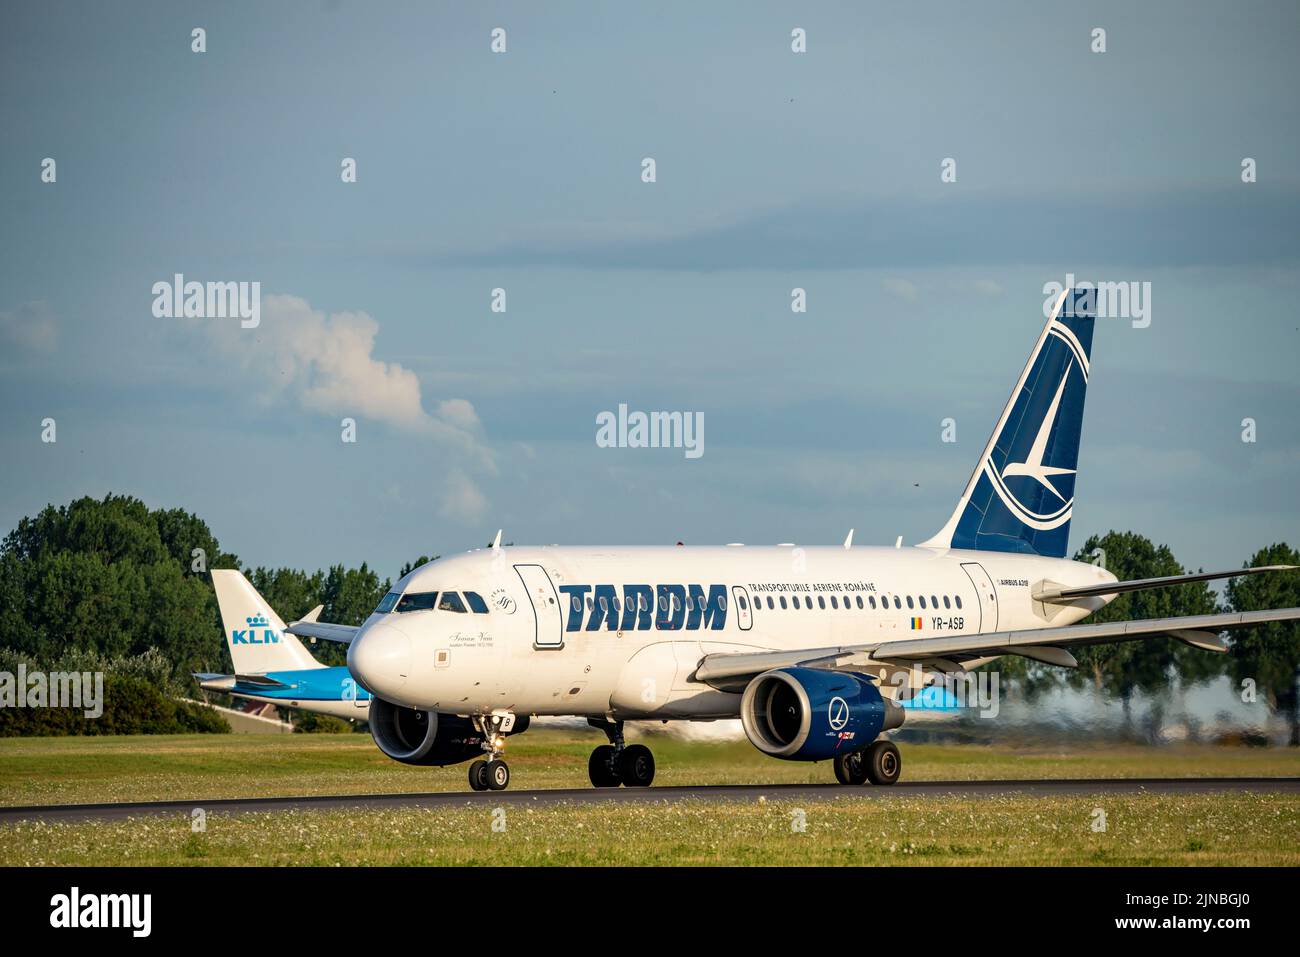 Amsterdam Shiphol Airport, Polderbaan, one of 6 runways, on taxiway for take-off, YR-ASB, TAROM Airbus A318-100. Stock Photo